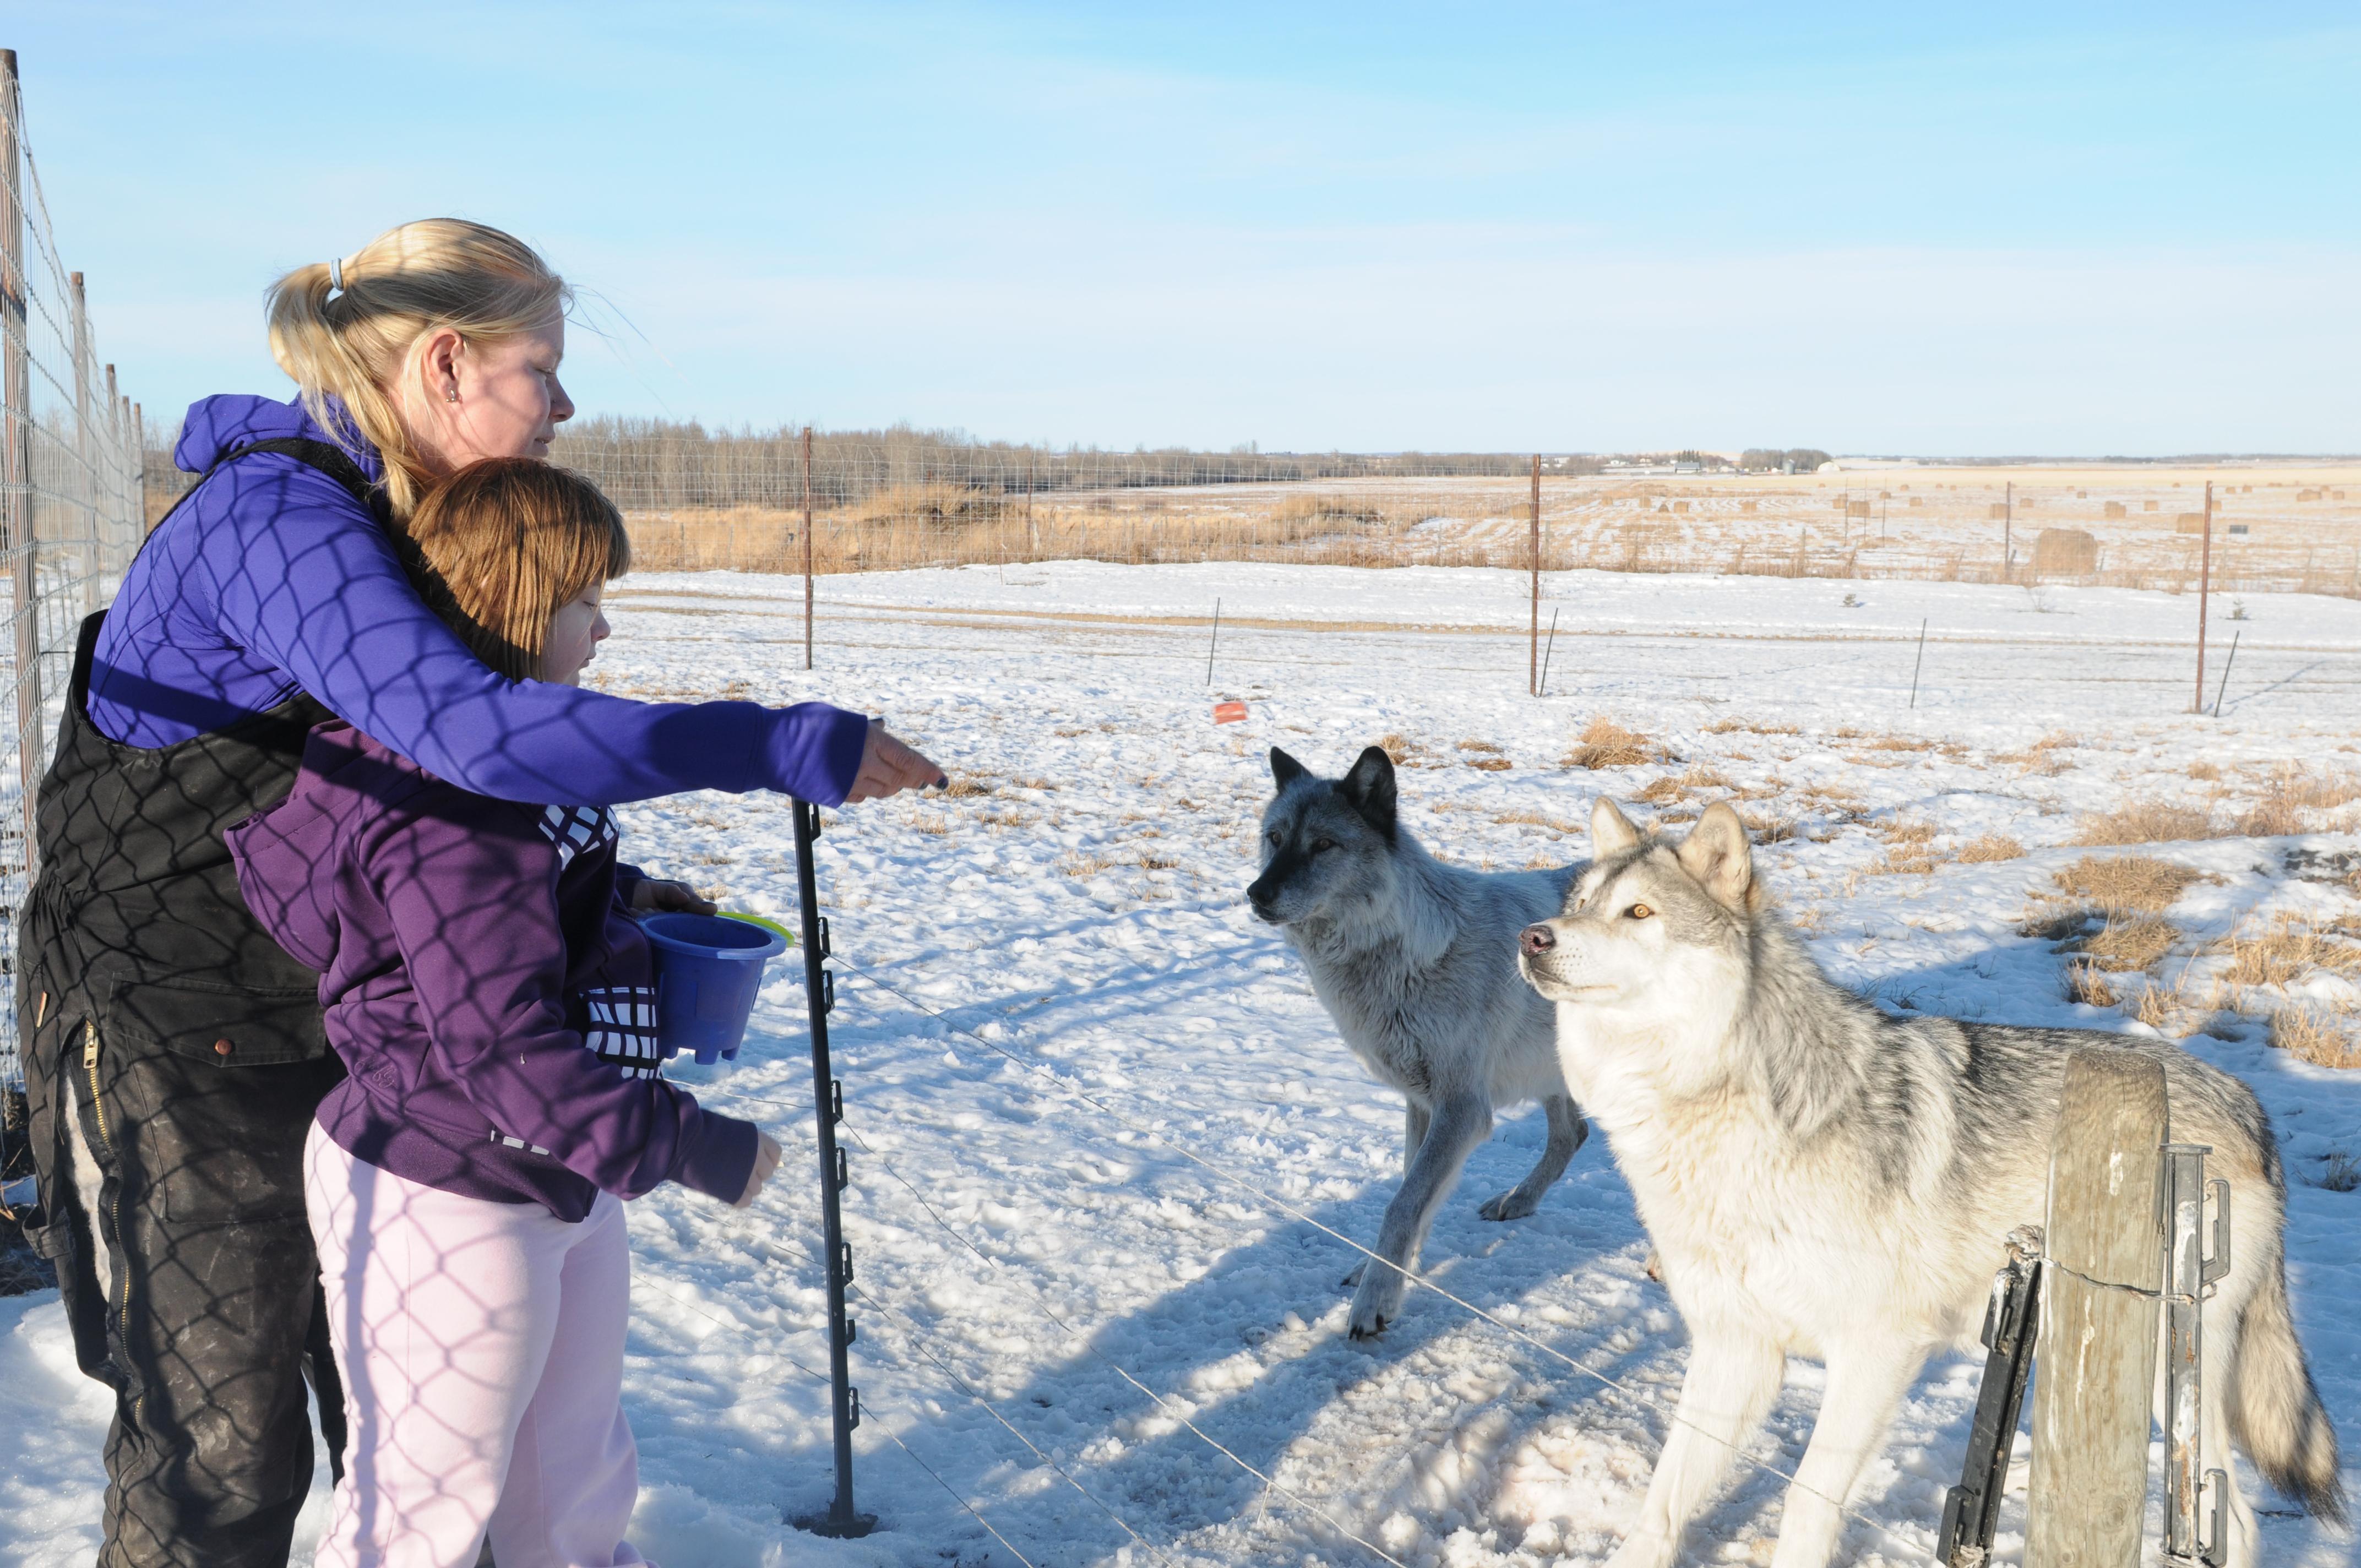 SNACK TIME- Serena Bos and her daughter Quissianna Bell feed the wolves a snack at the Discovery Wildlife zoo in Innisfail recently.